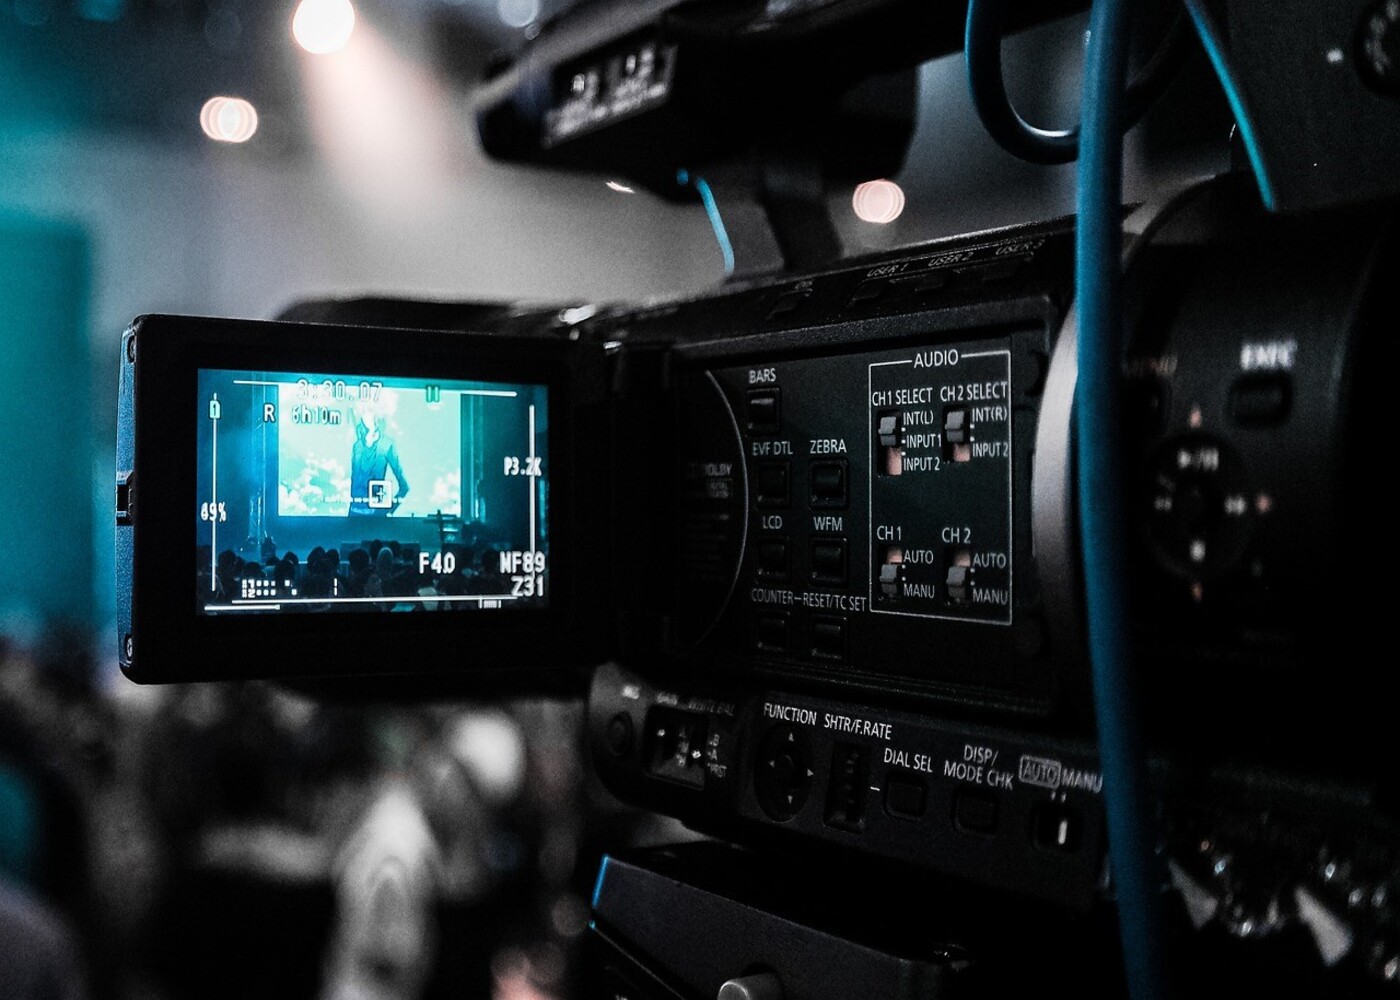 The 7 Ways to Make Your Video Content More Accessible